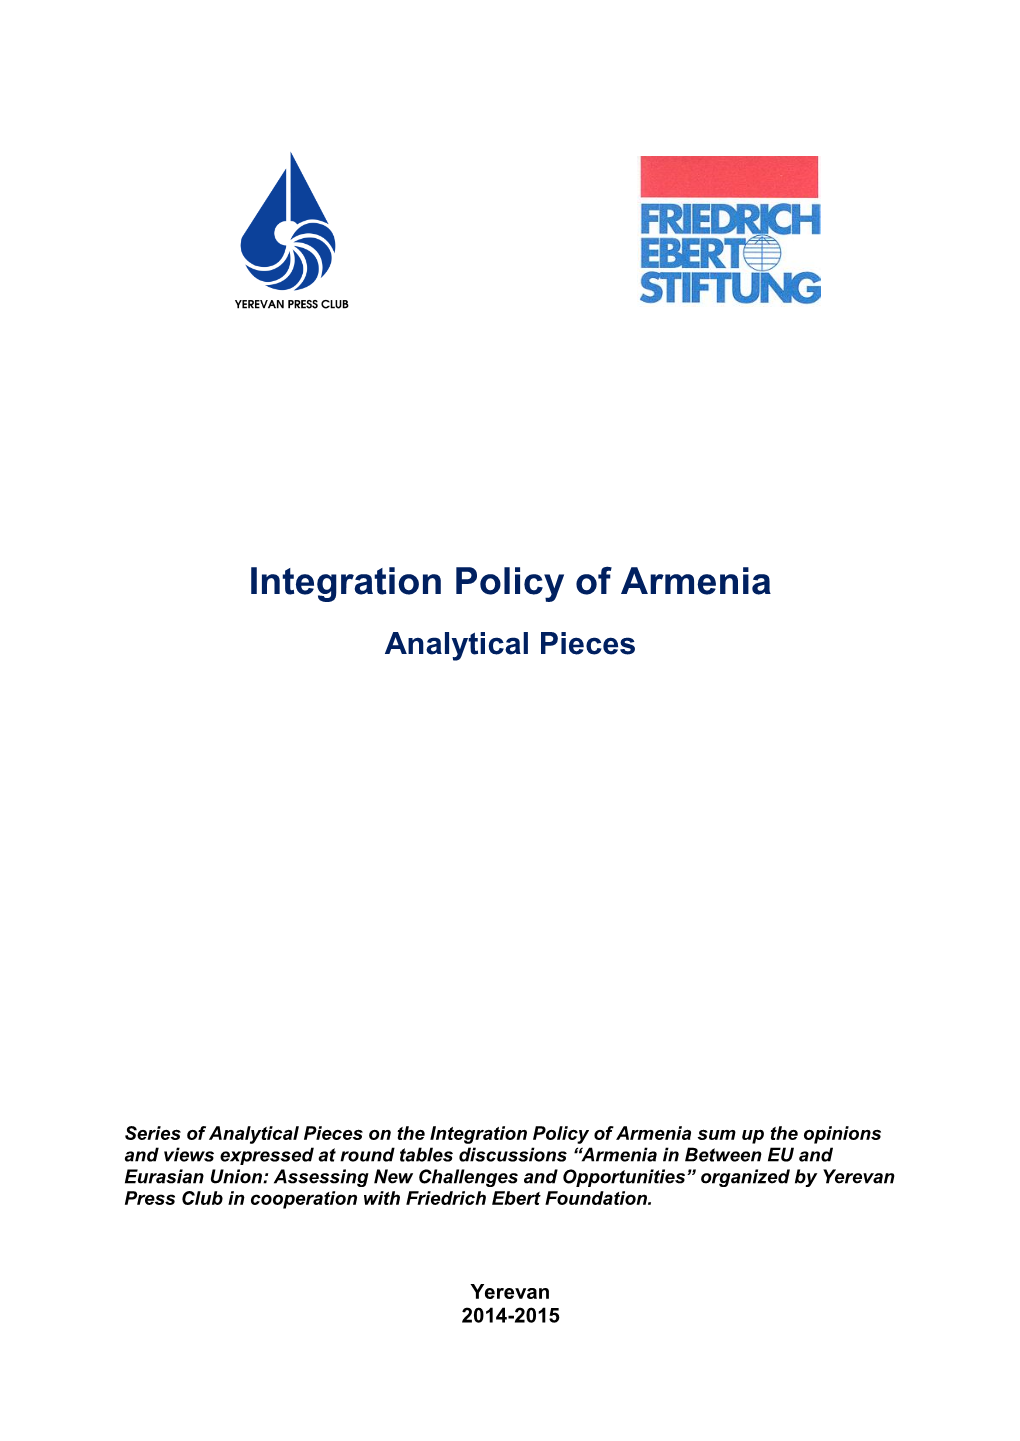 Series of Analytical Pieces on the Integration Policy of Armenia